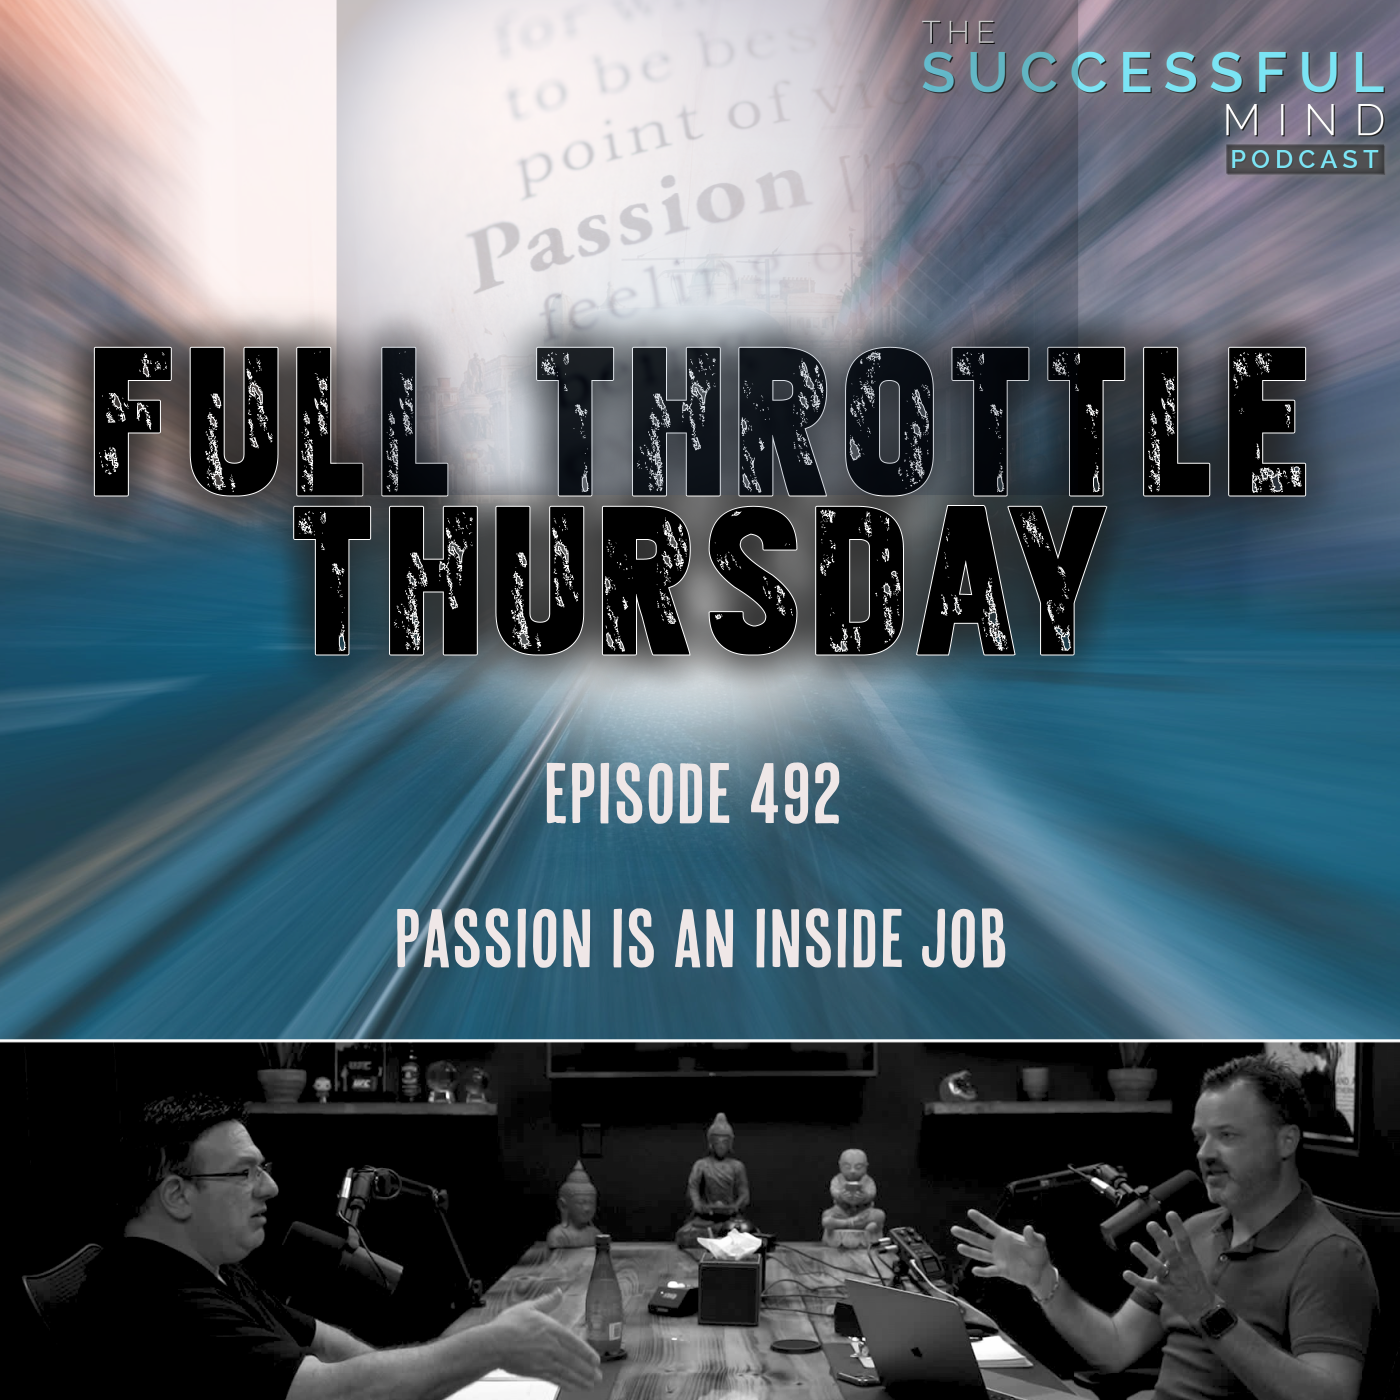 The Successful Mind Podcast - Full Throttle Thursday - Passion is an Inside Job